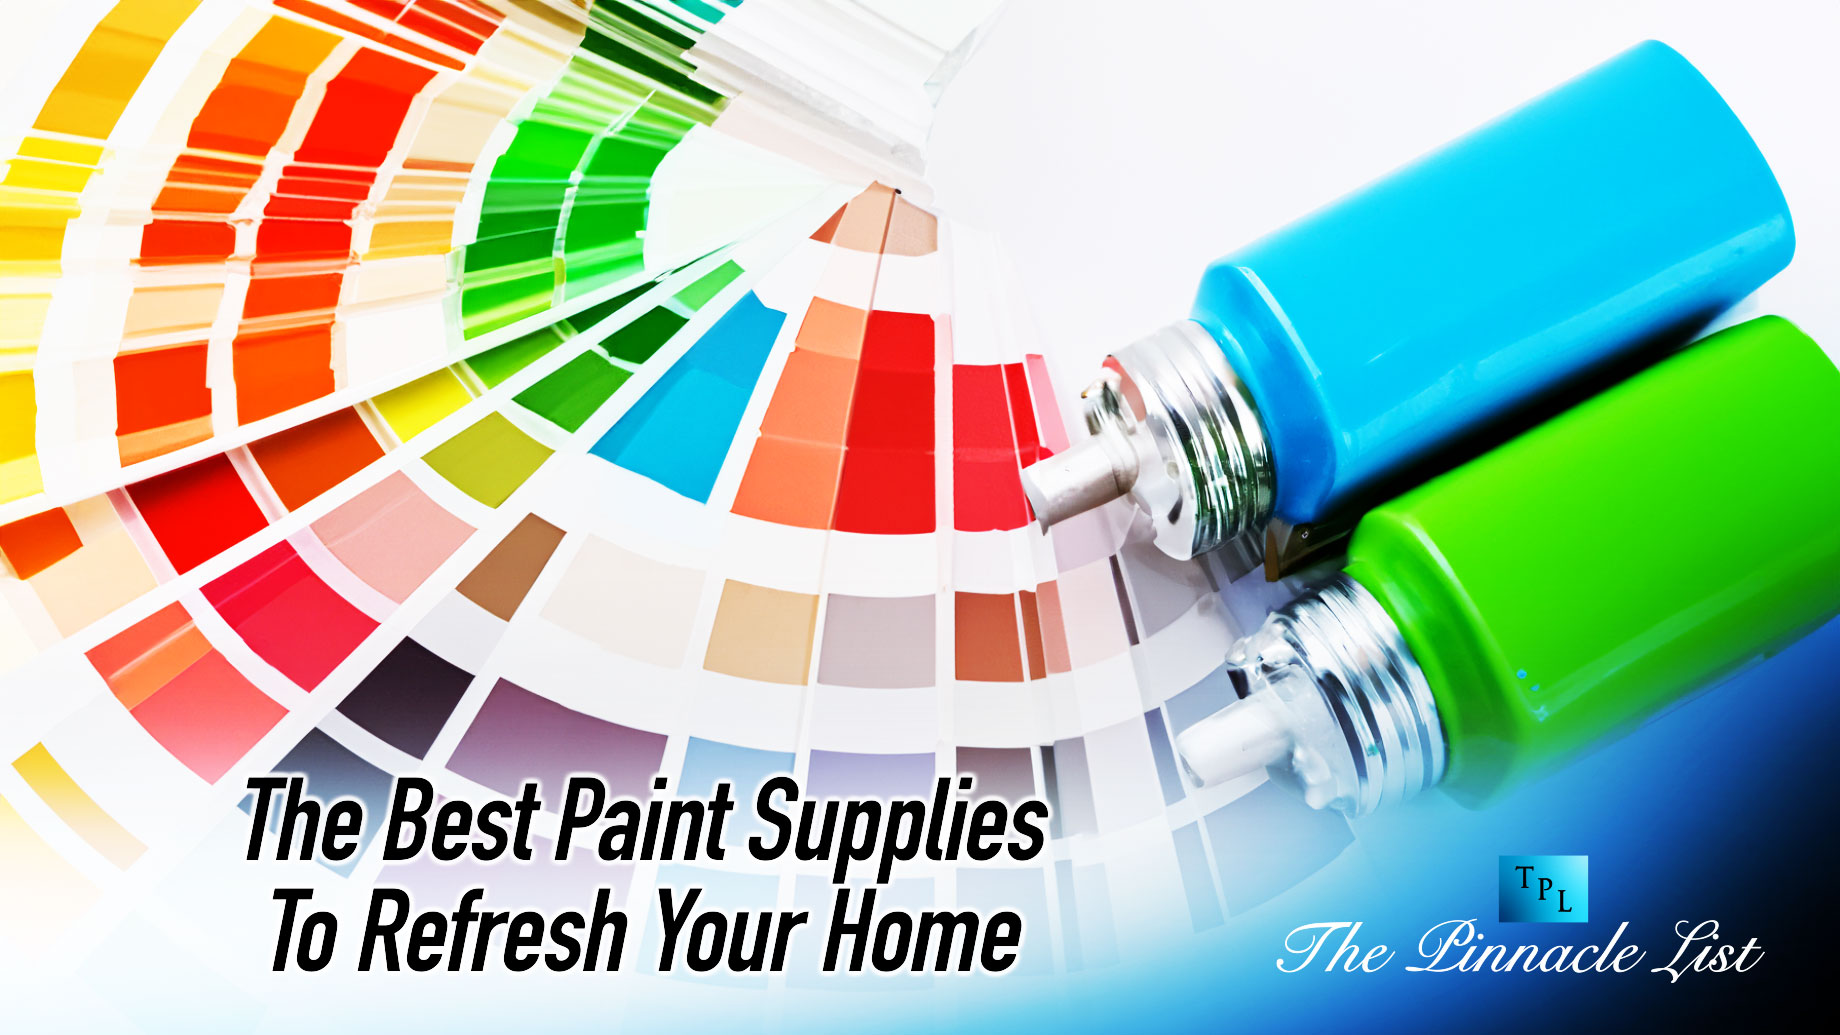 The Best Paint Supplies To Refresh Your Home